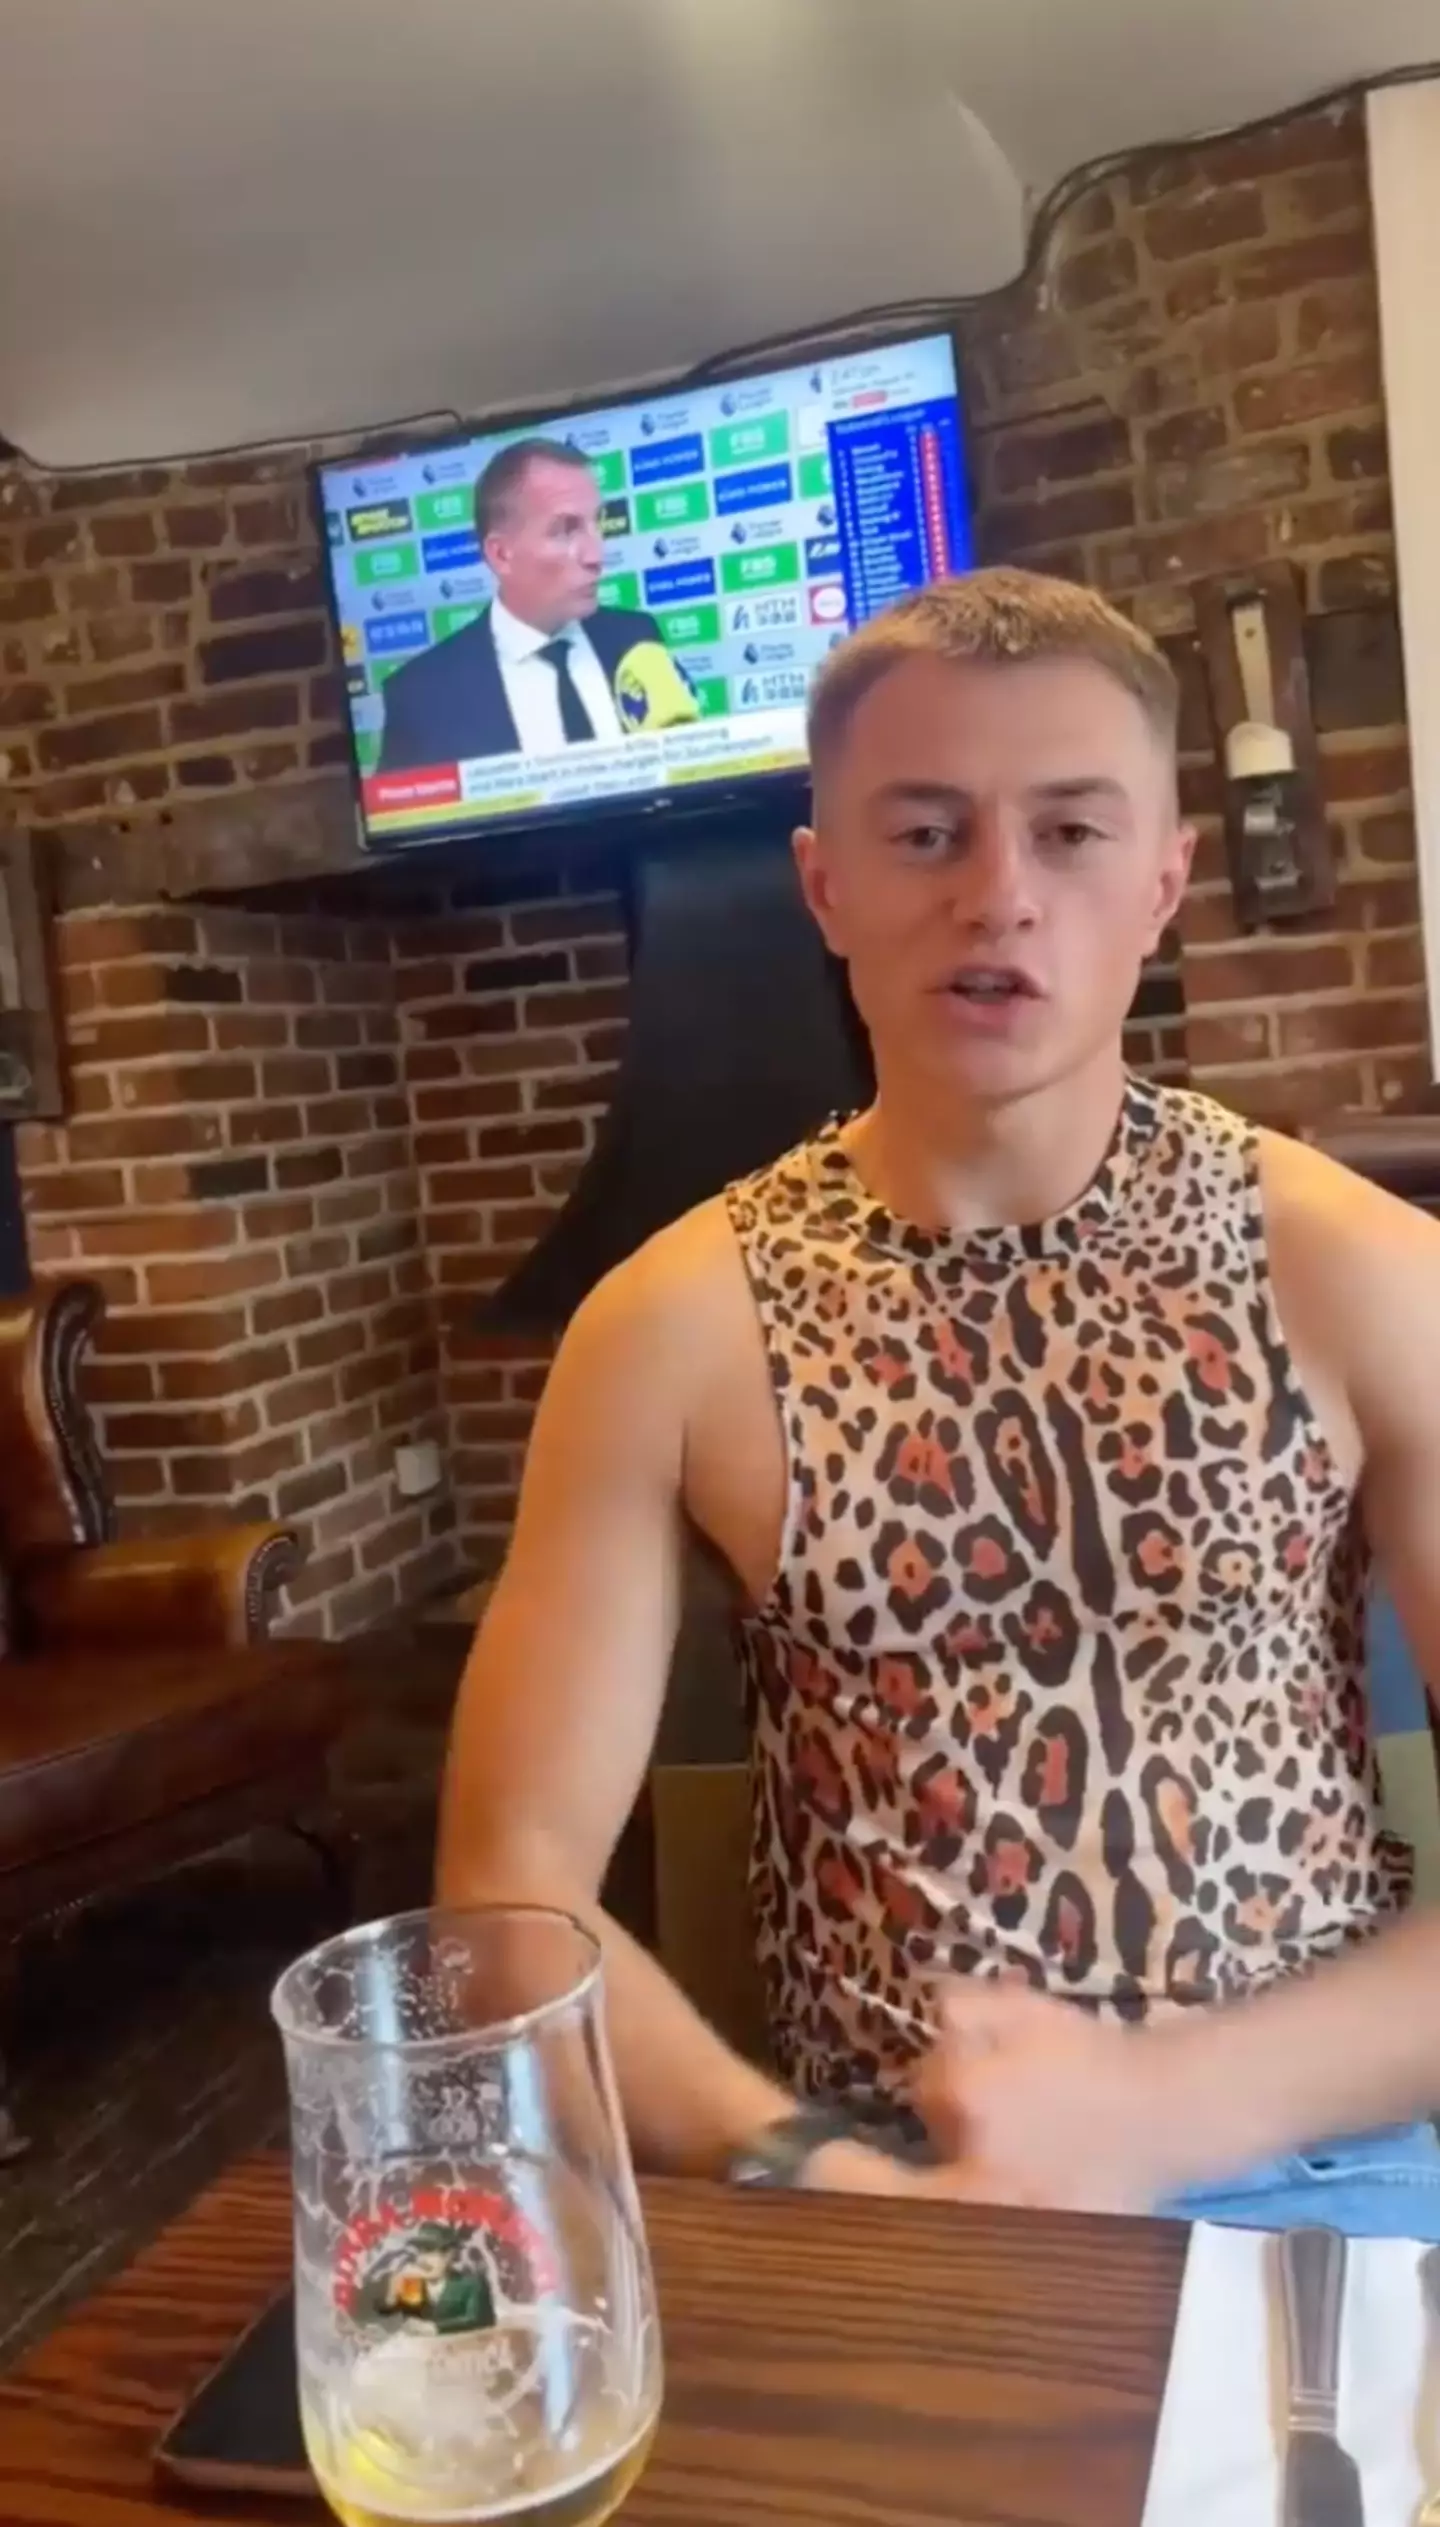 One of the lads had to wear a leopard print vest after losing a bet.